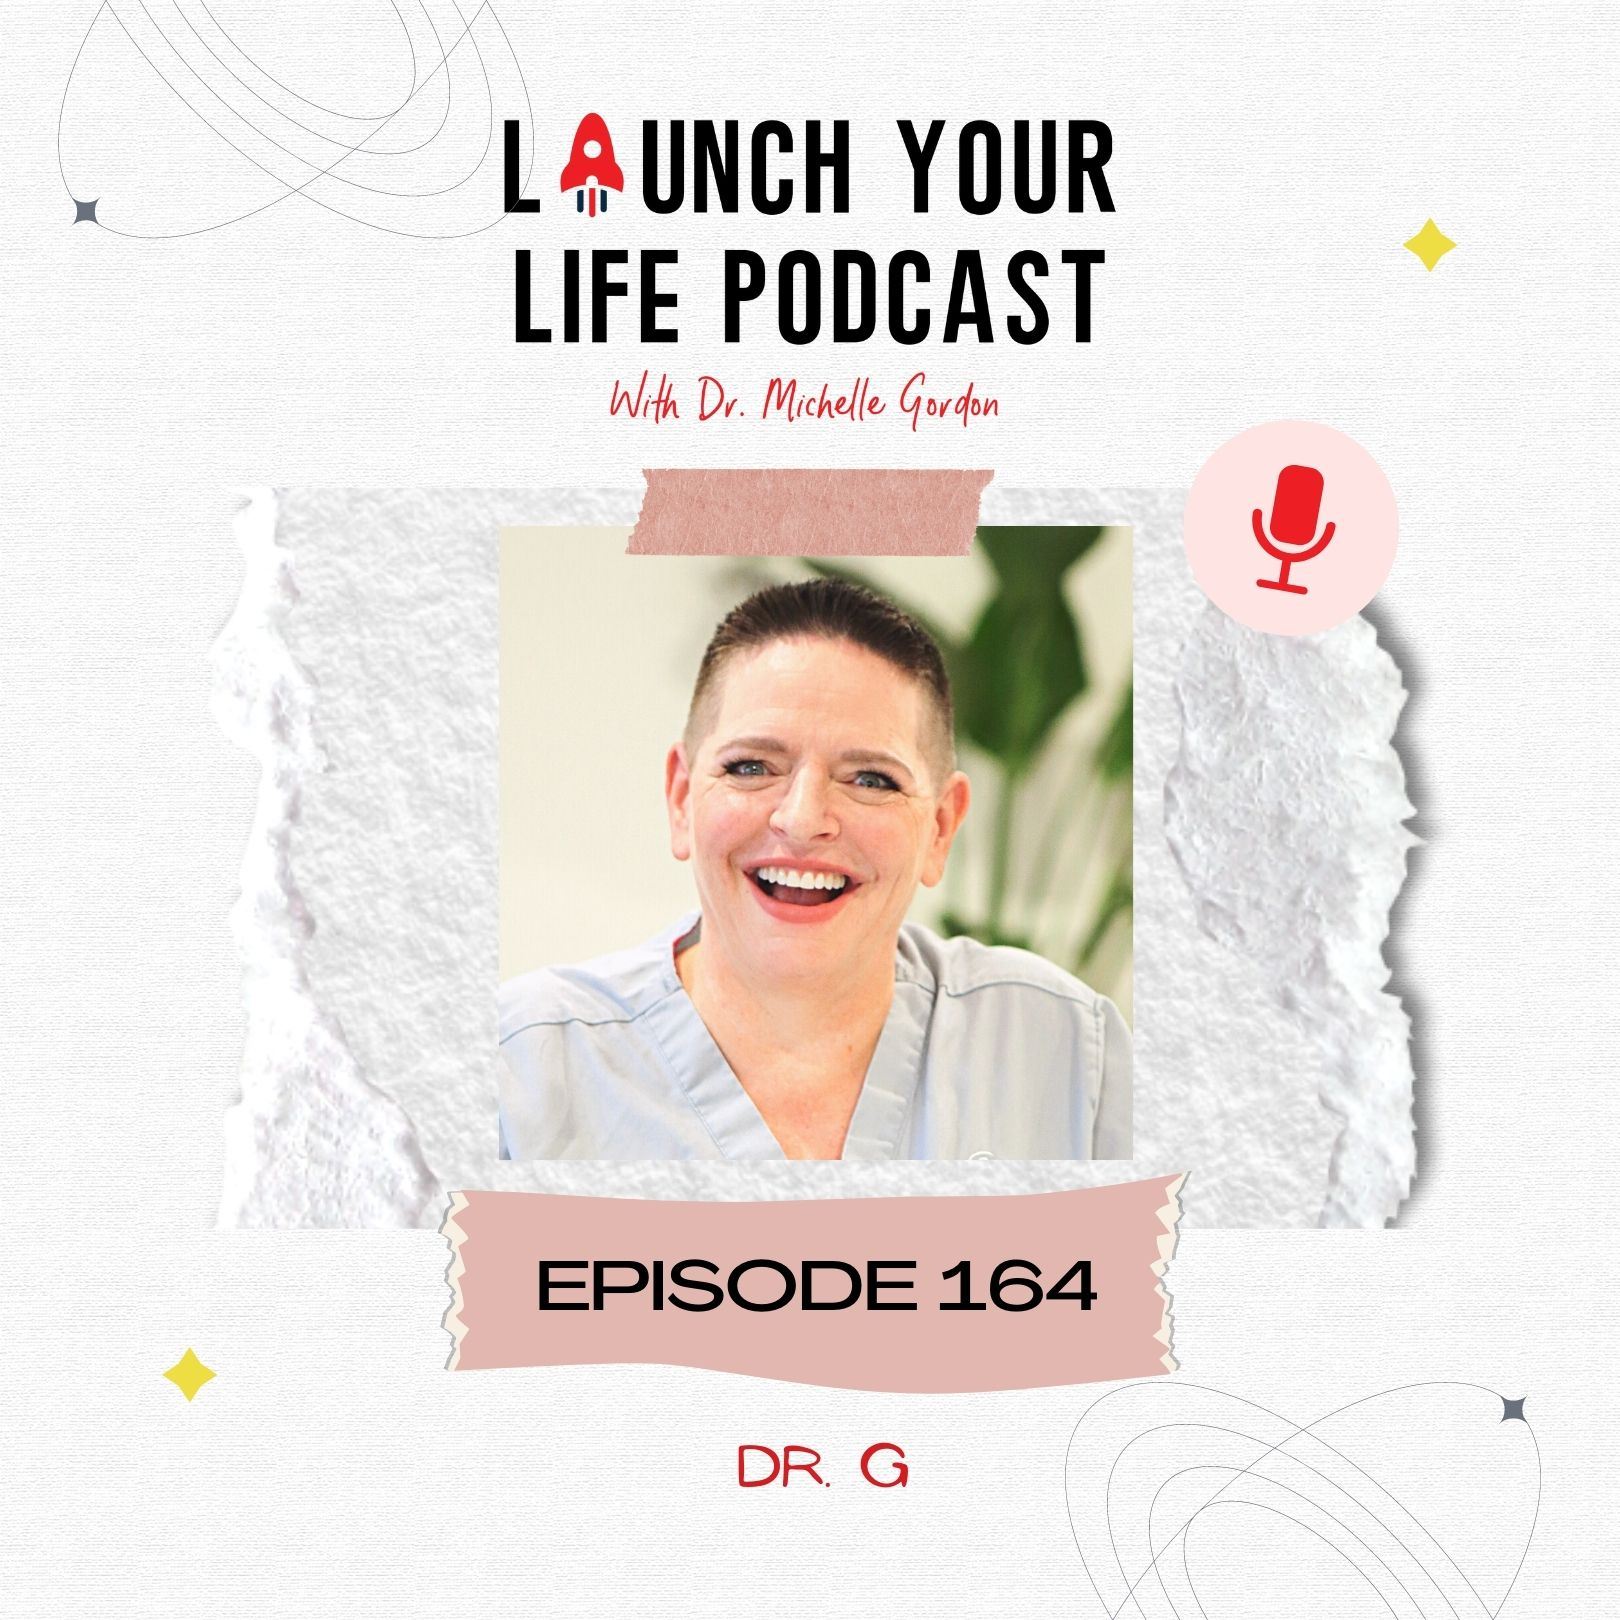 Memoir Series: Growing Pains 3 - A New Medical Diagnosis (Launch Your Life Podcast Episode 164)